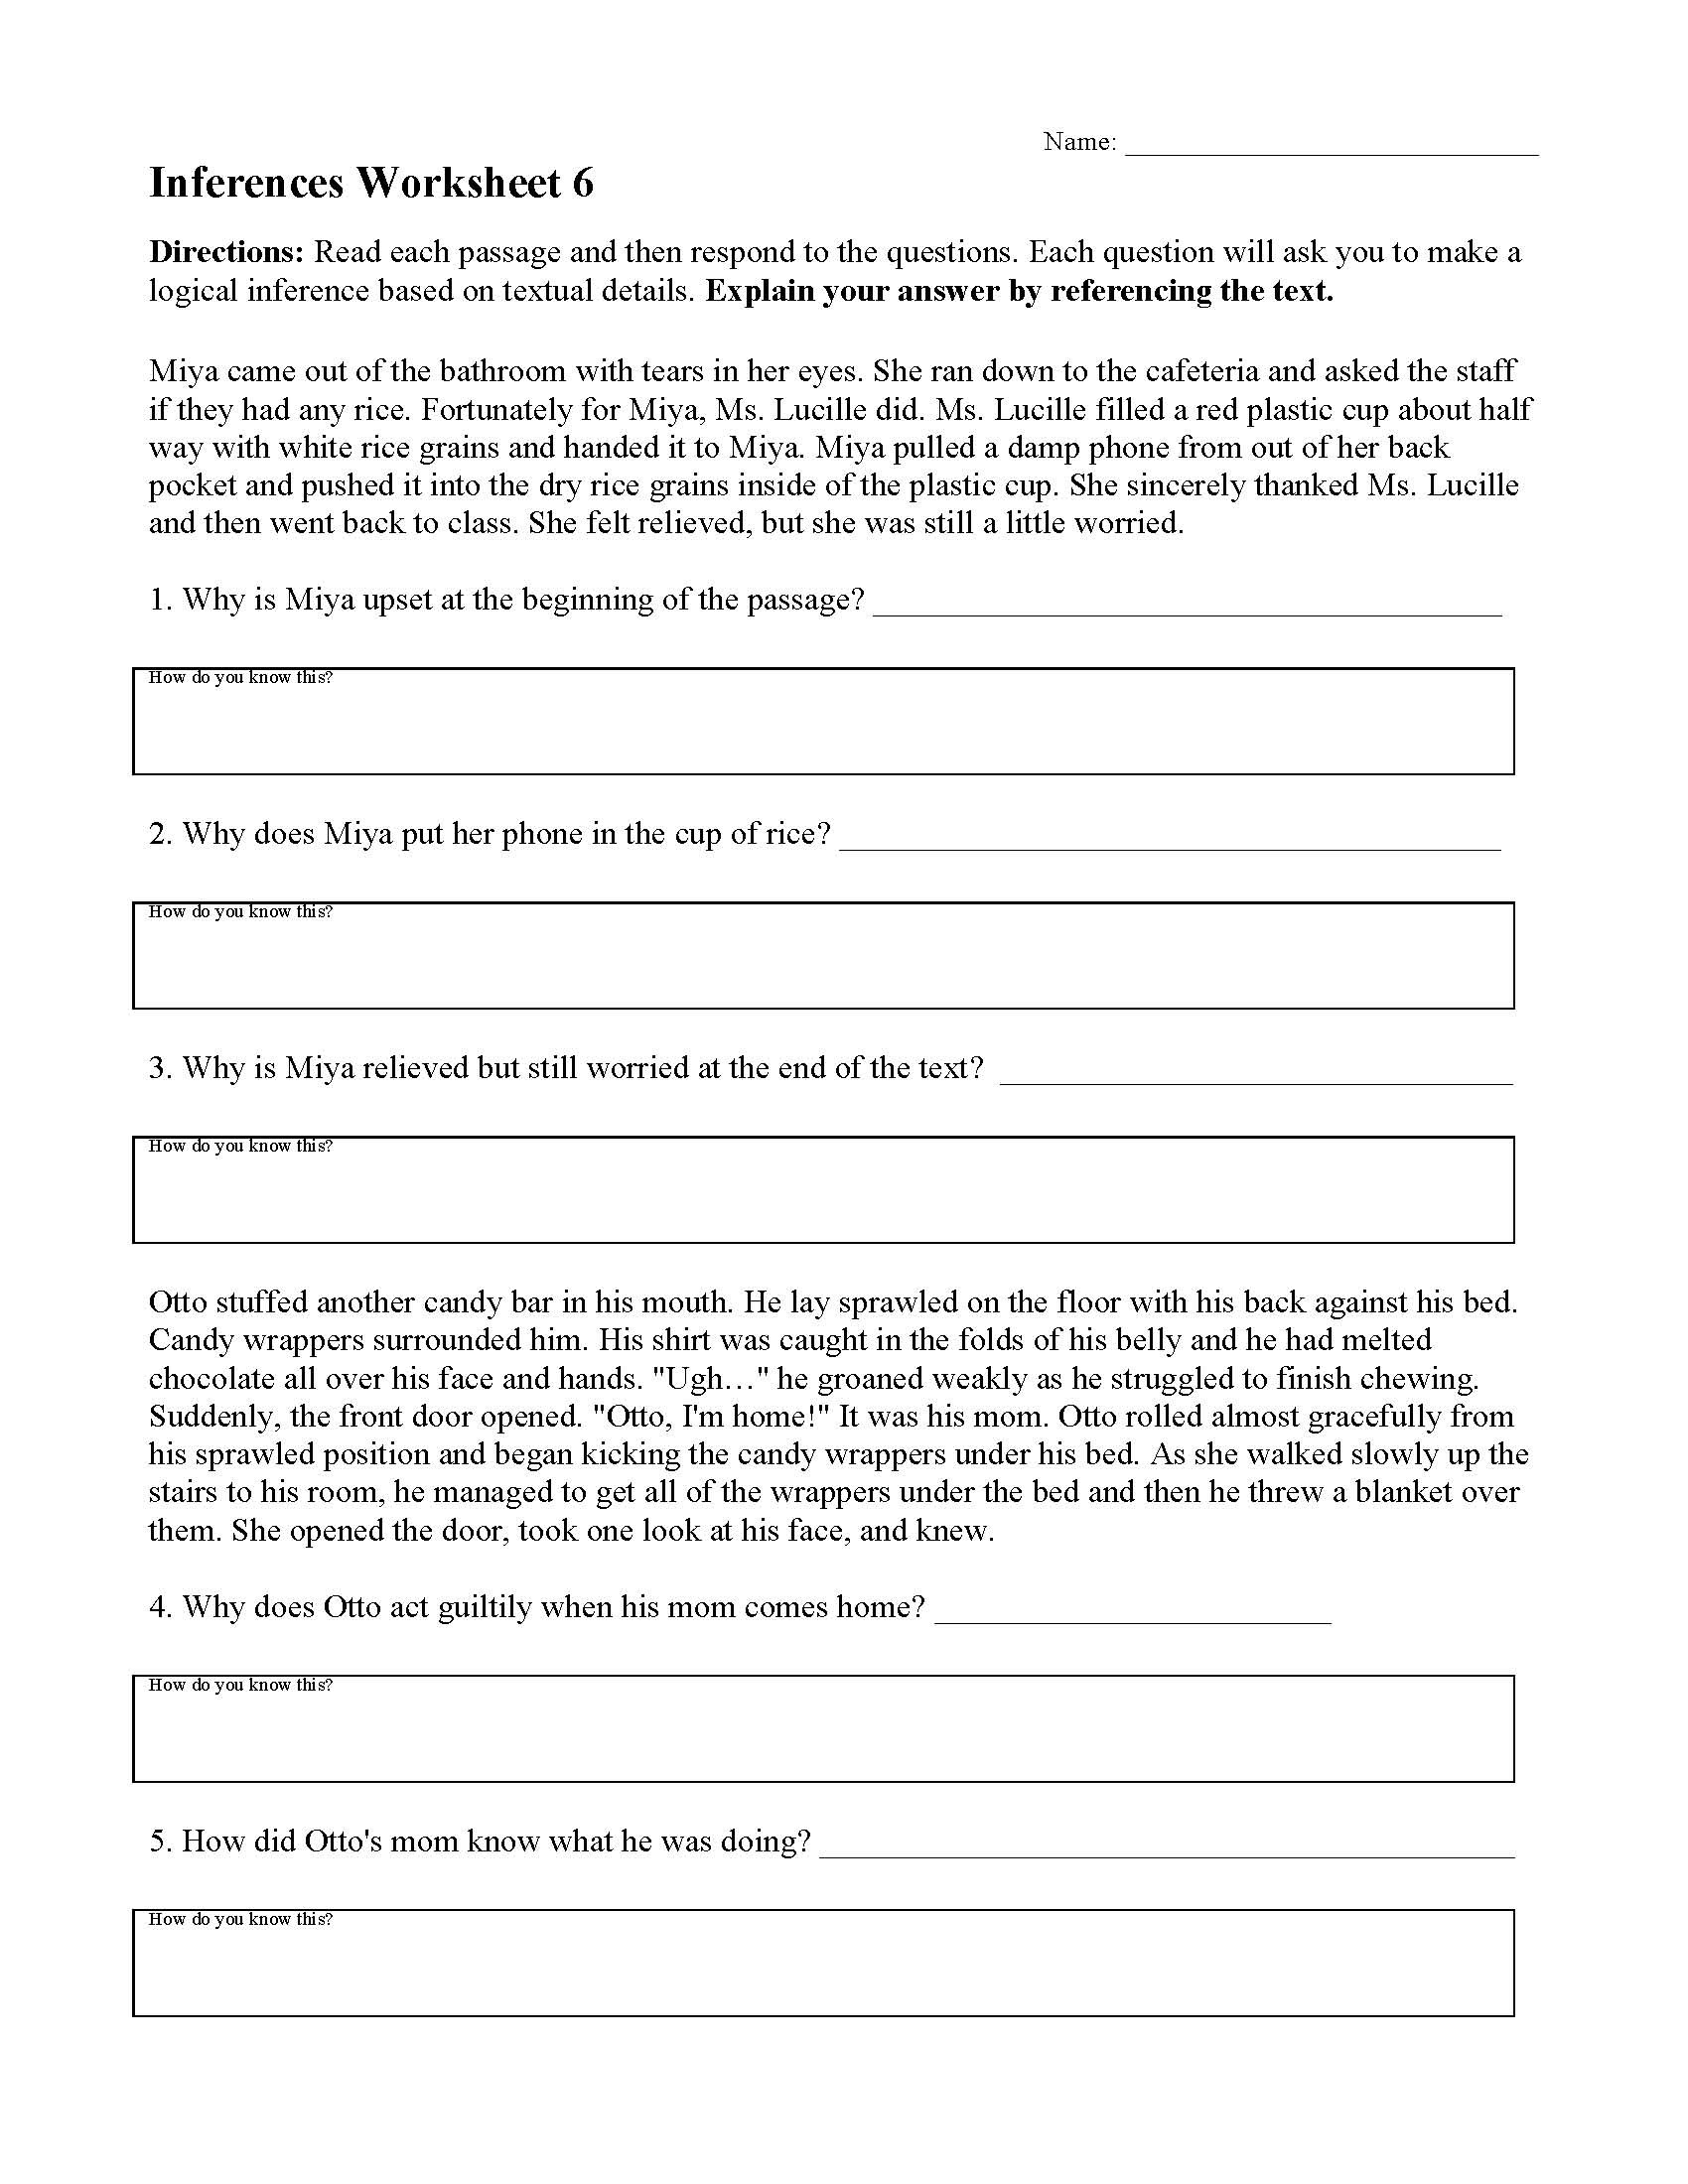 Citing Textual Evidence Worksheet Inferences Worksheets